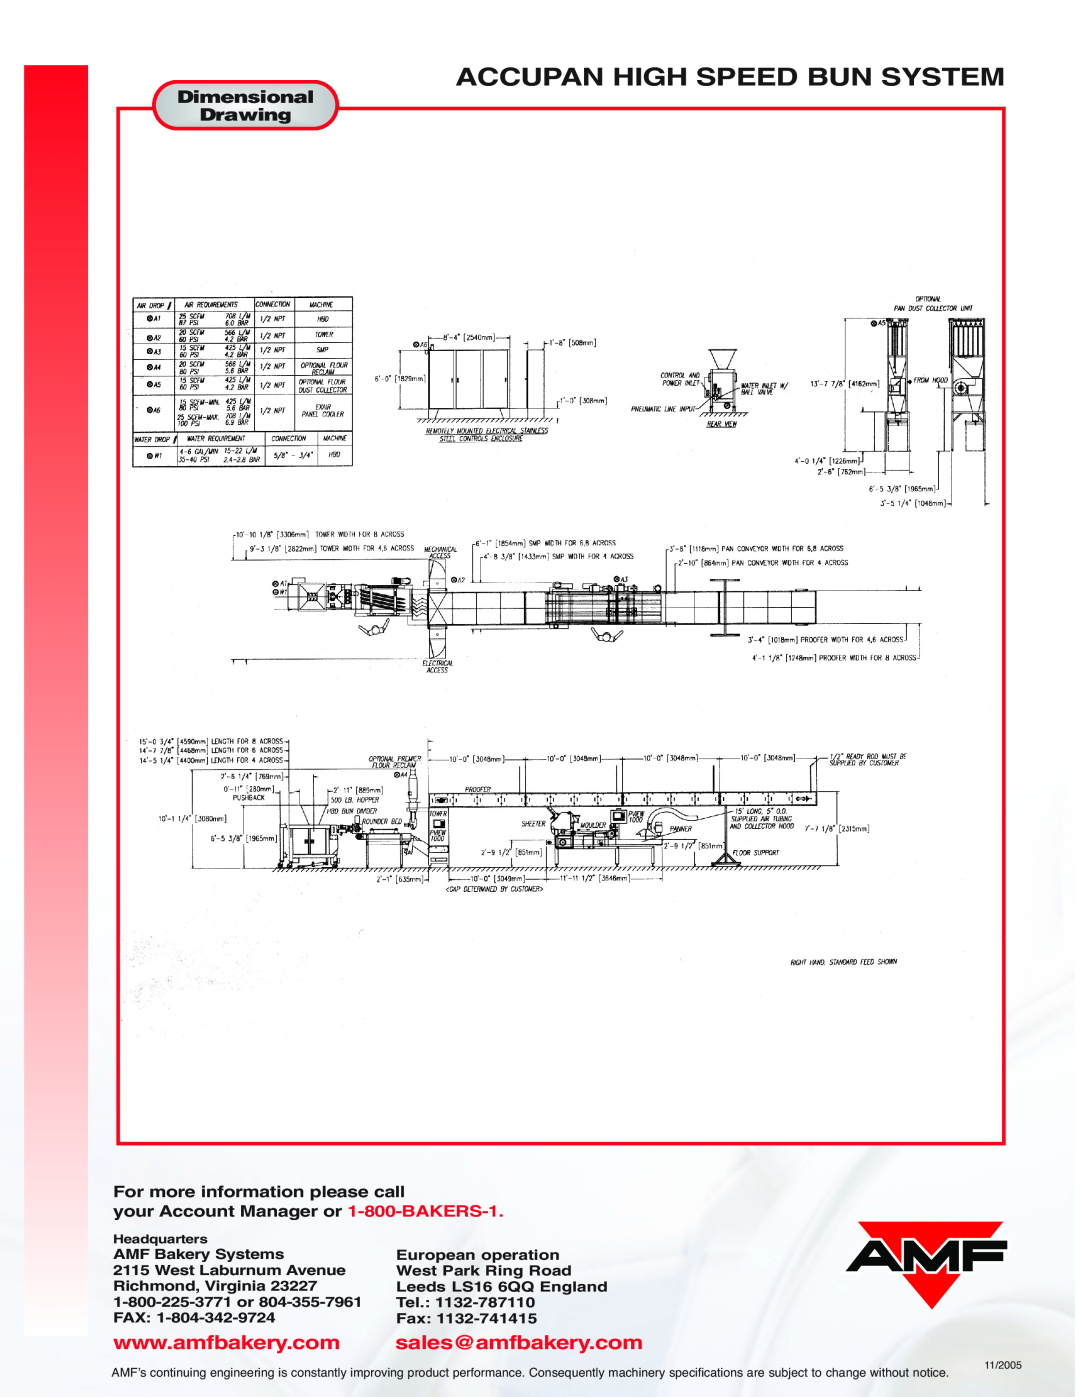 AMF Accupan High Speed Bun System manual Dimensional Drawing, Headquarters, 11/2005 